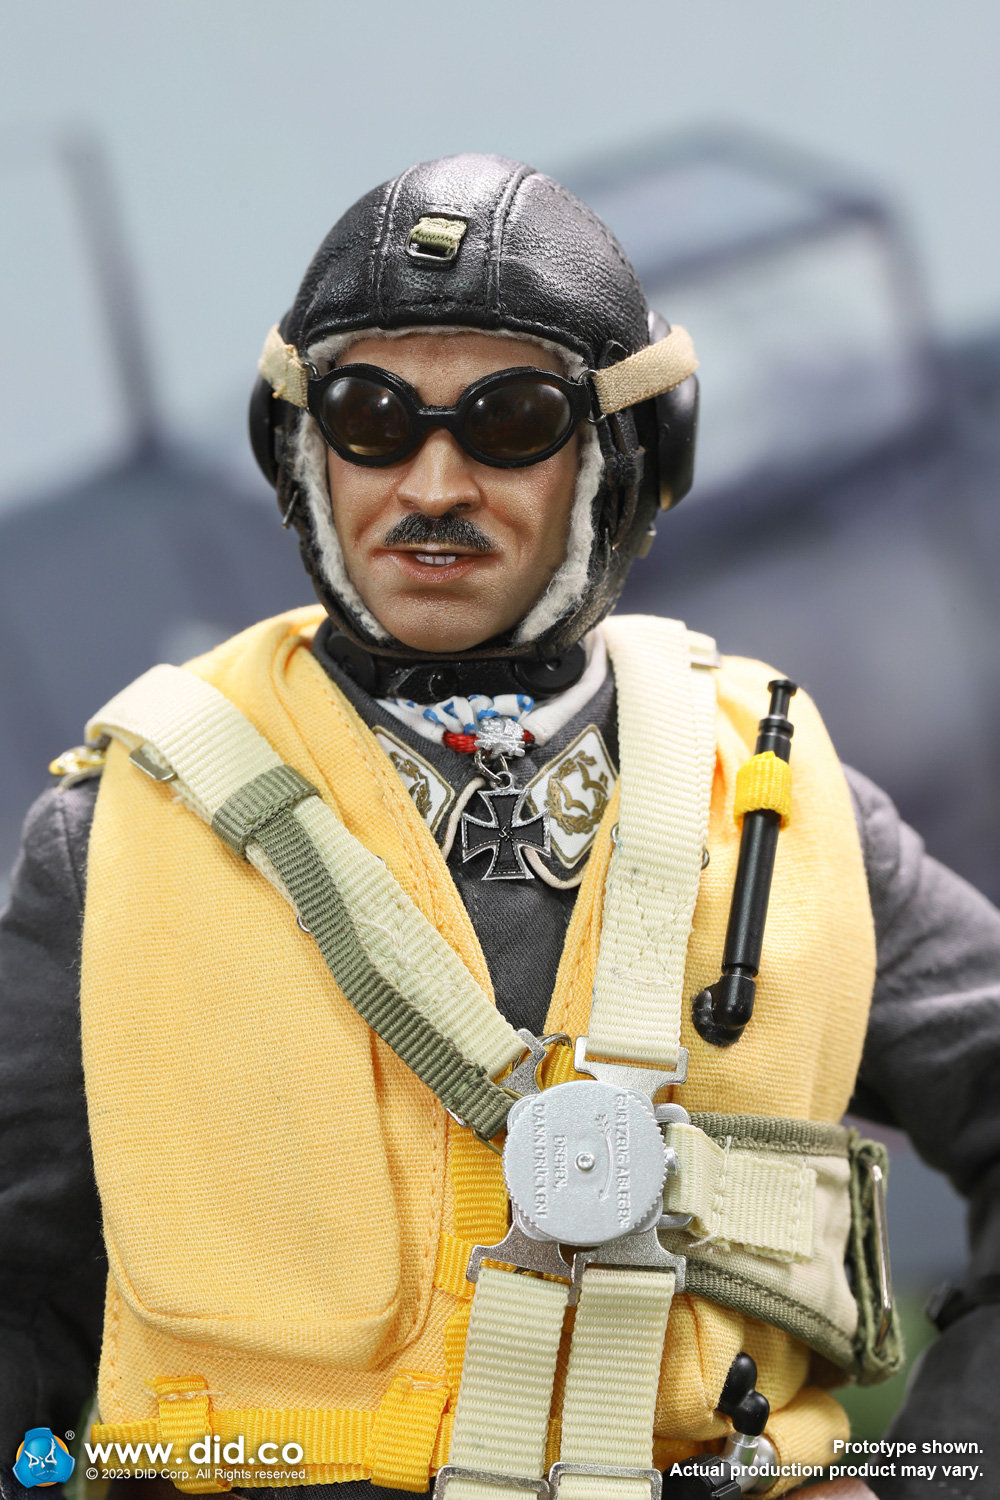 Historical - NEW PRODUCT: DiD: D80165 WWII German Luftwaffe Ace Pilot – Adolf Galland 1823